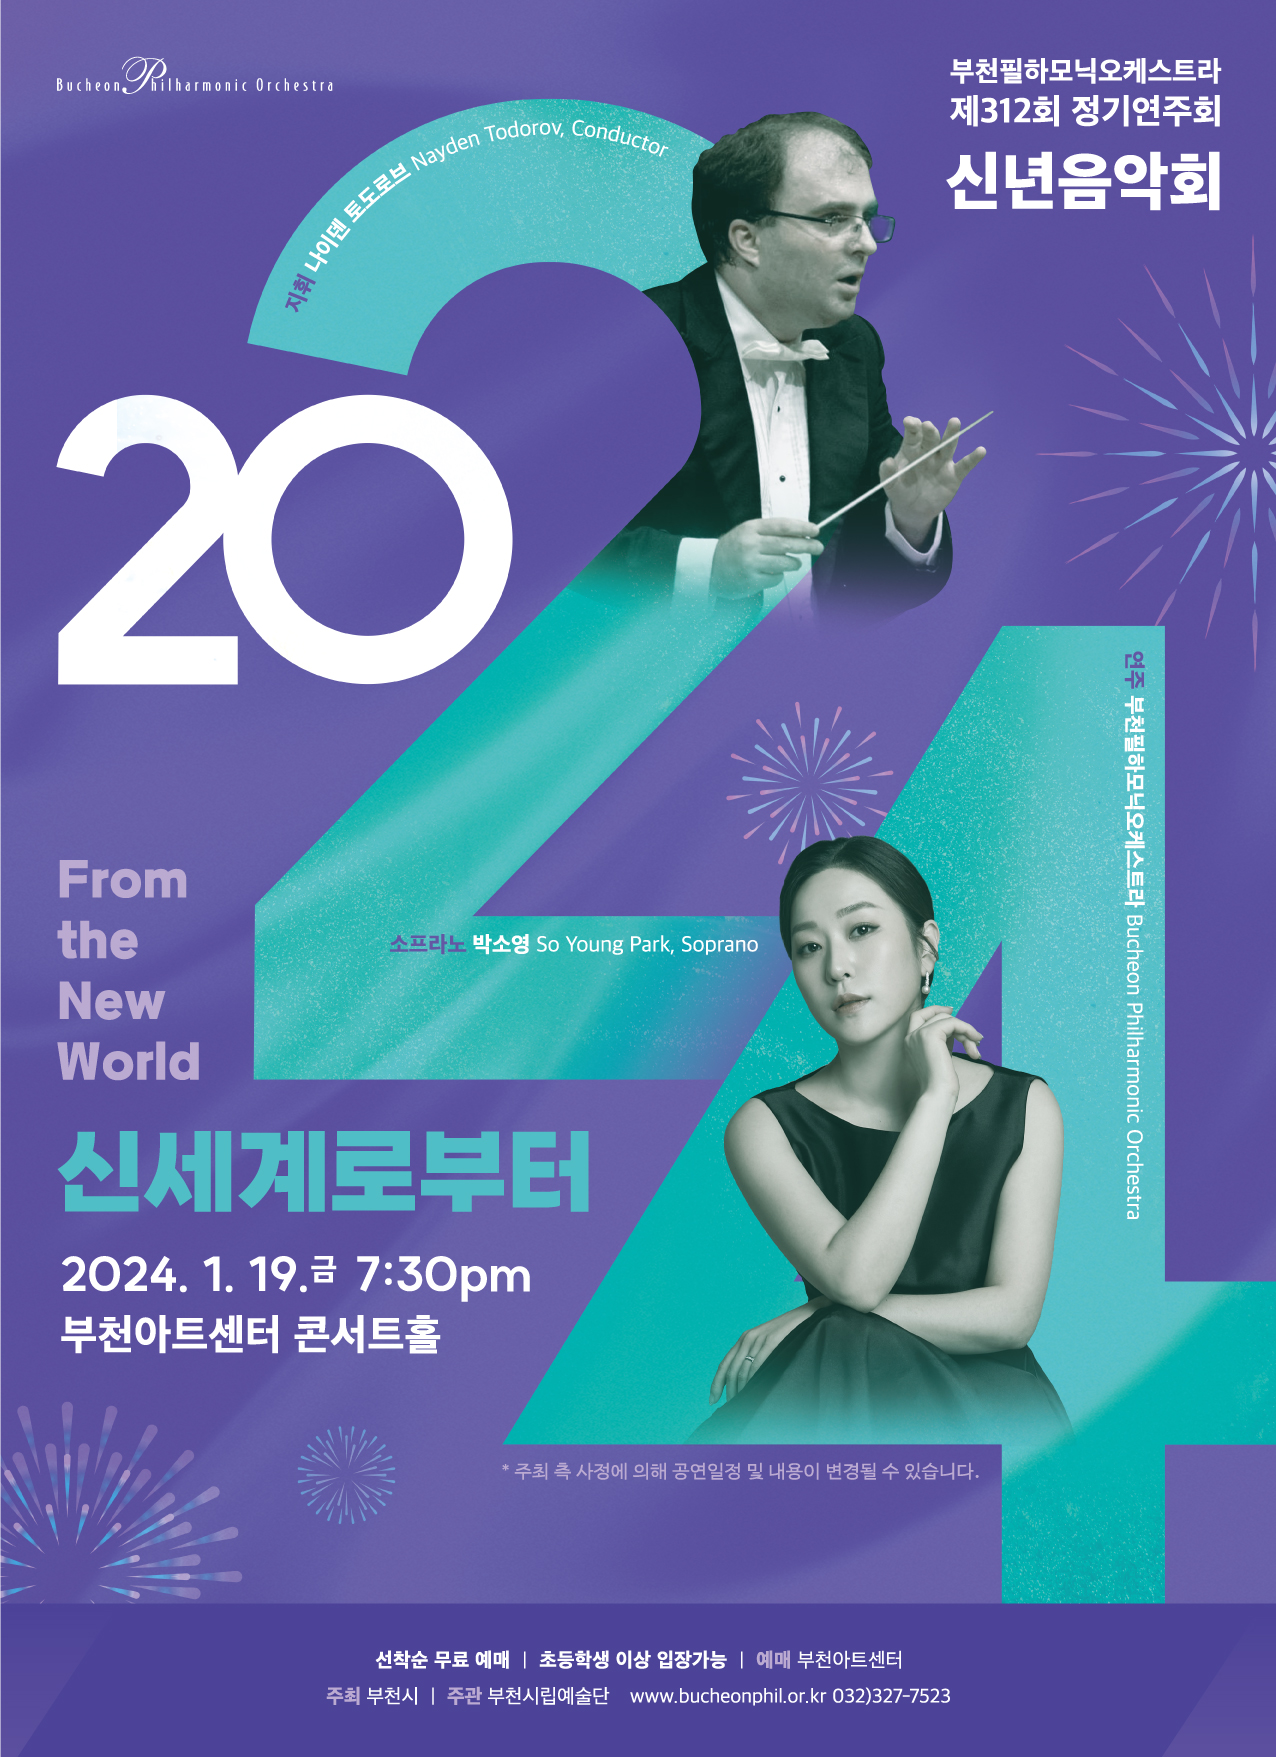 [1.19]Bucheon Philharmonic Orchestra 312nd Subscription Concert - New Year’s Concert